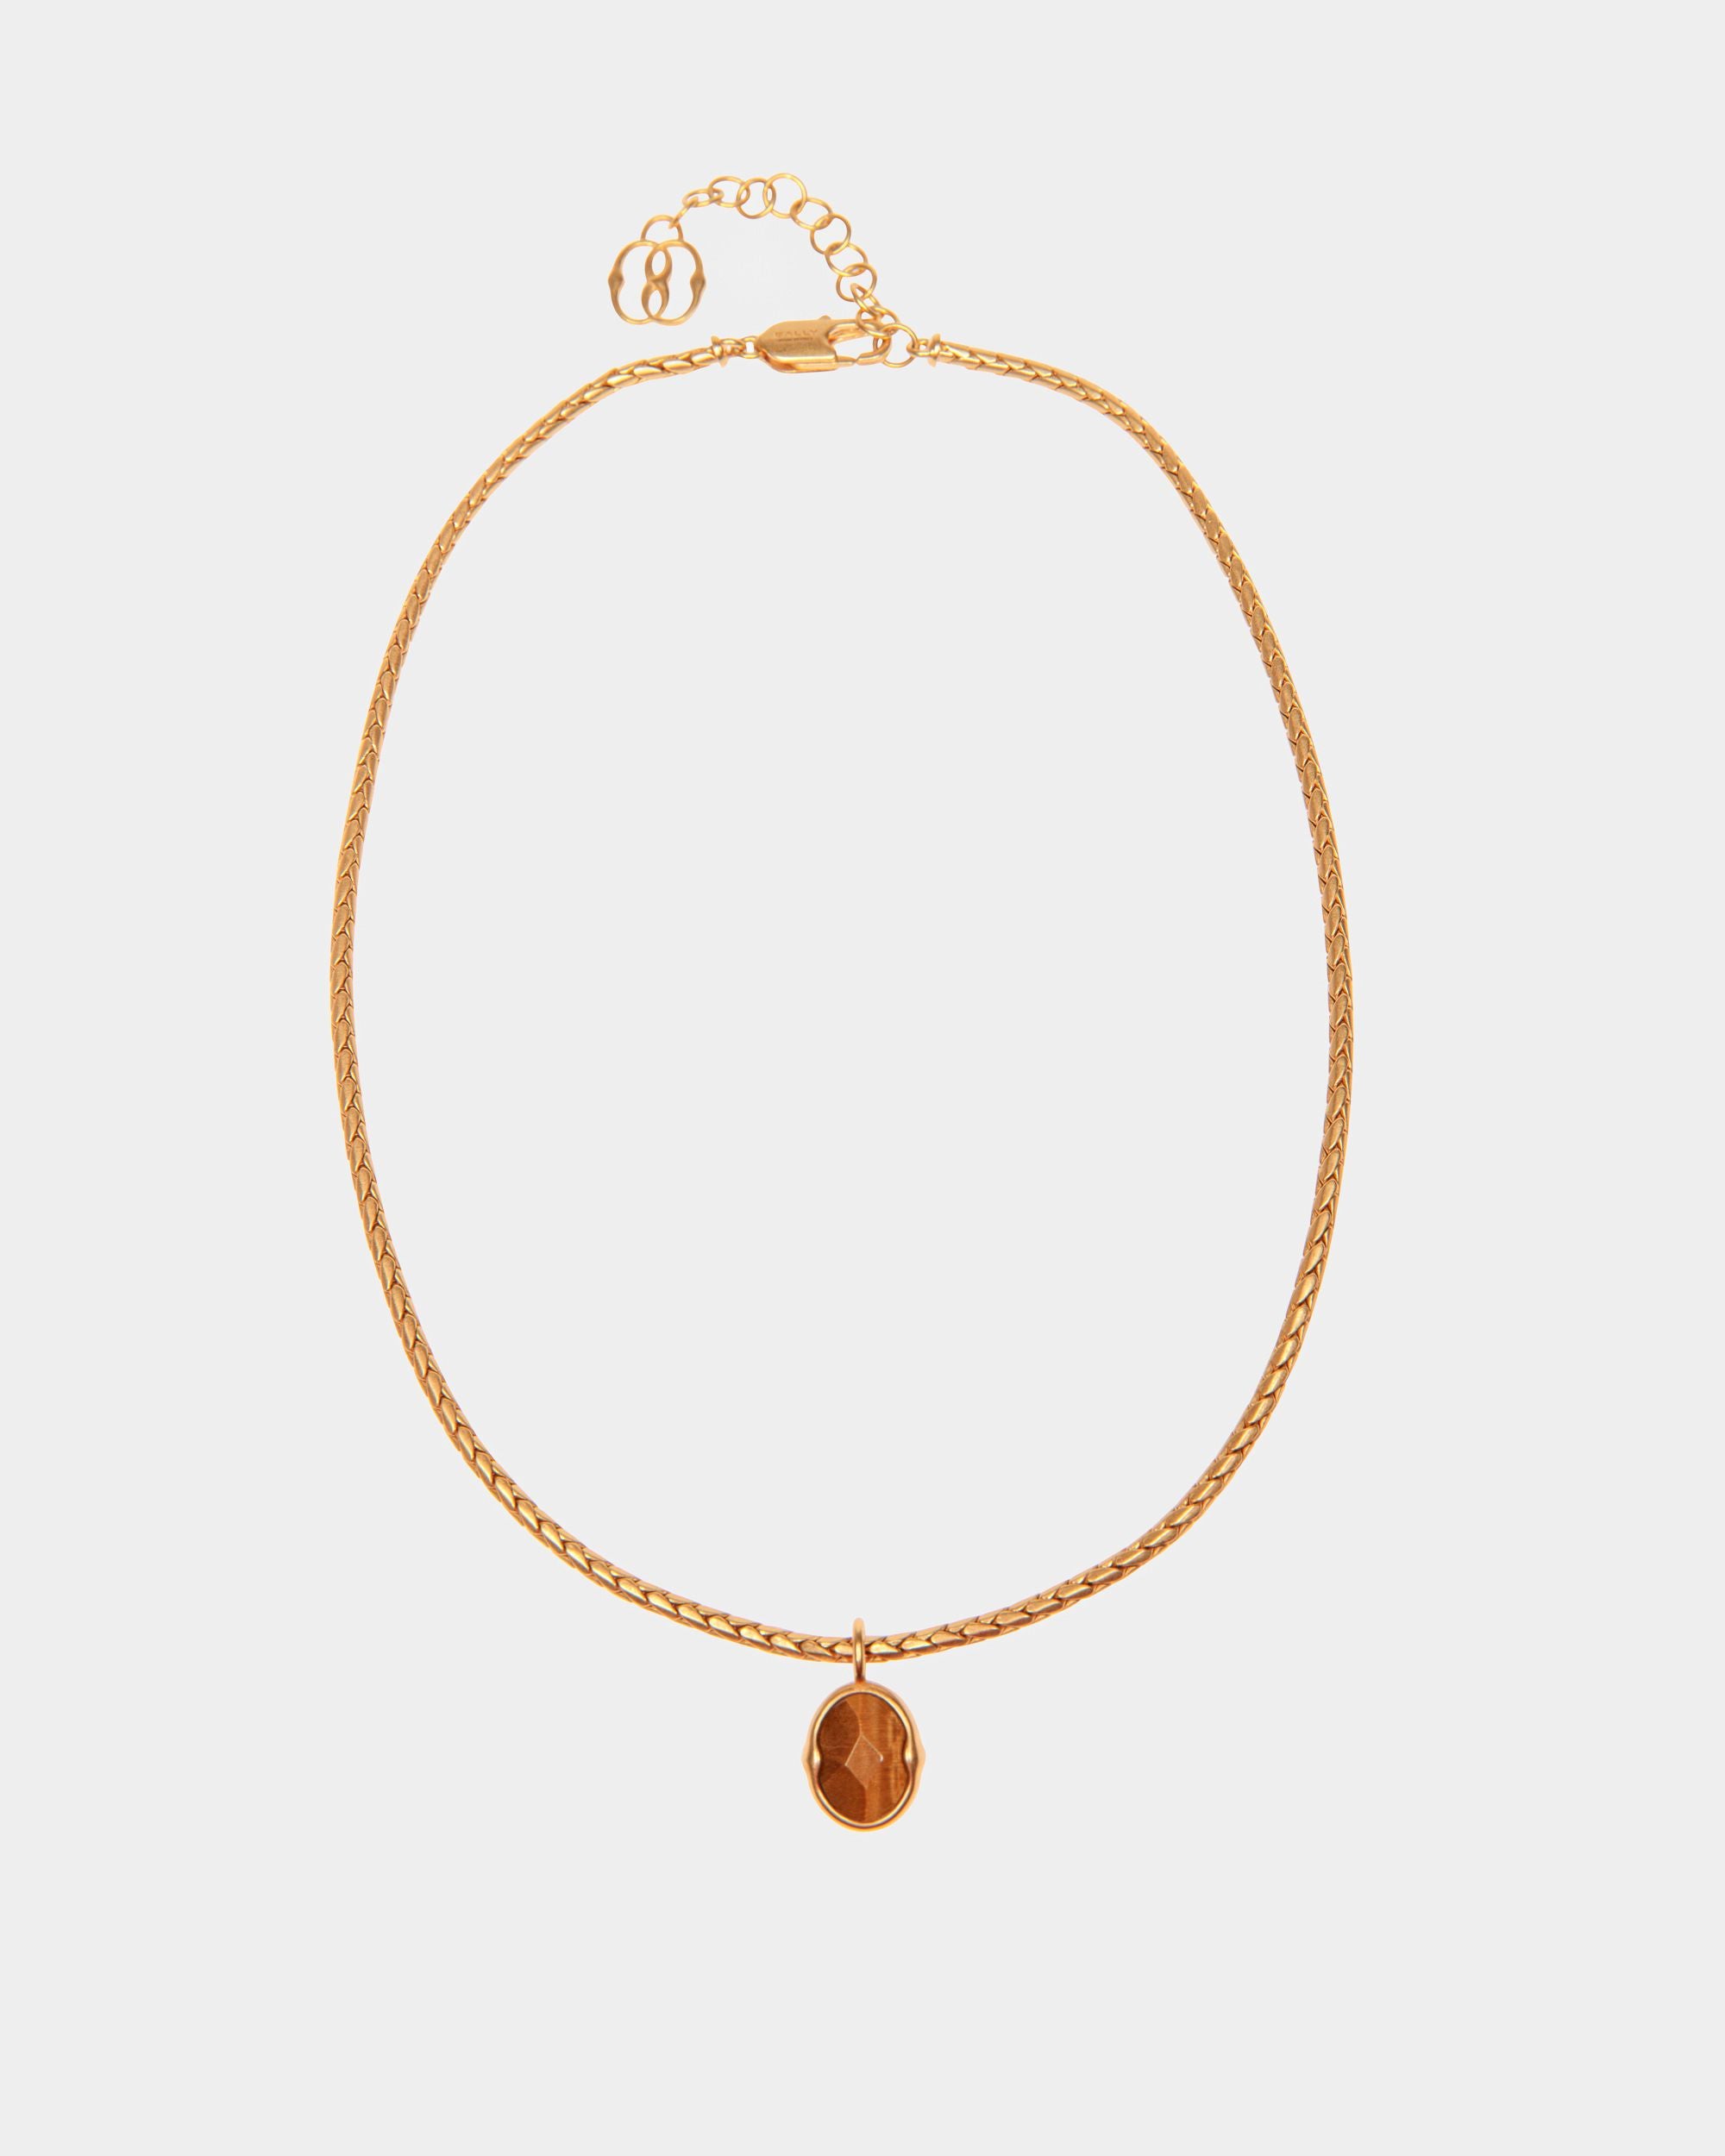 Women's Frame Outline Necklace With A Snake Chain | Bally | Still Life Front